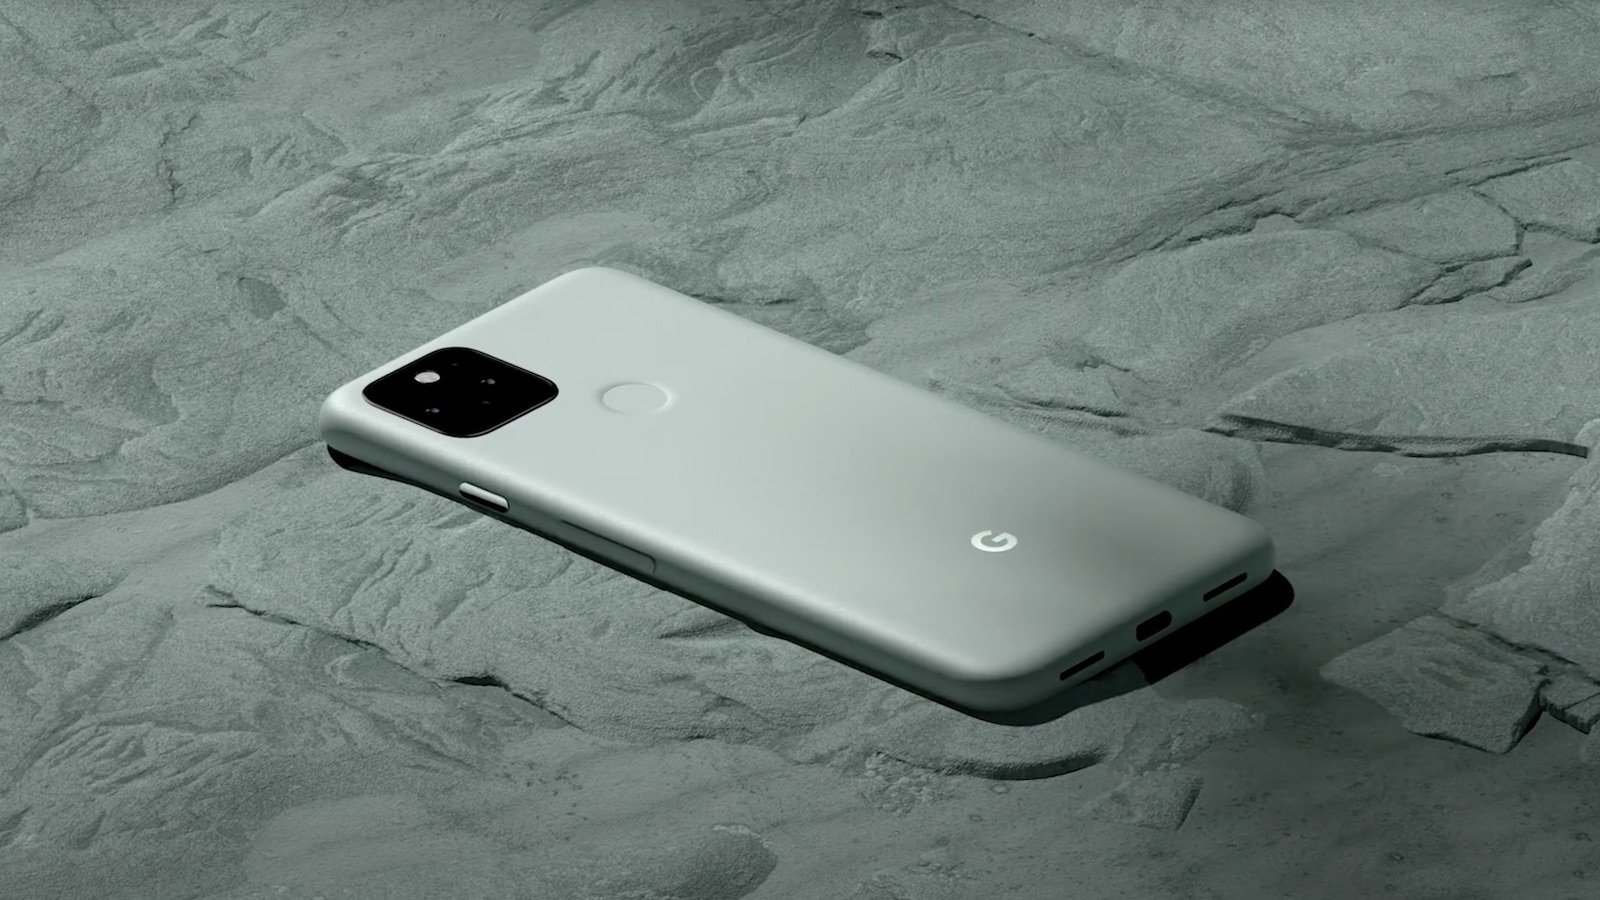 Google Pixel 5 smartphone offers wireless and reverse wireless charging